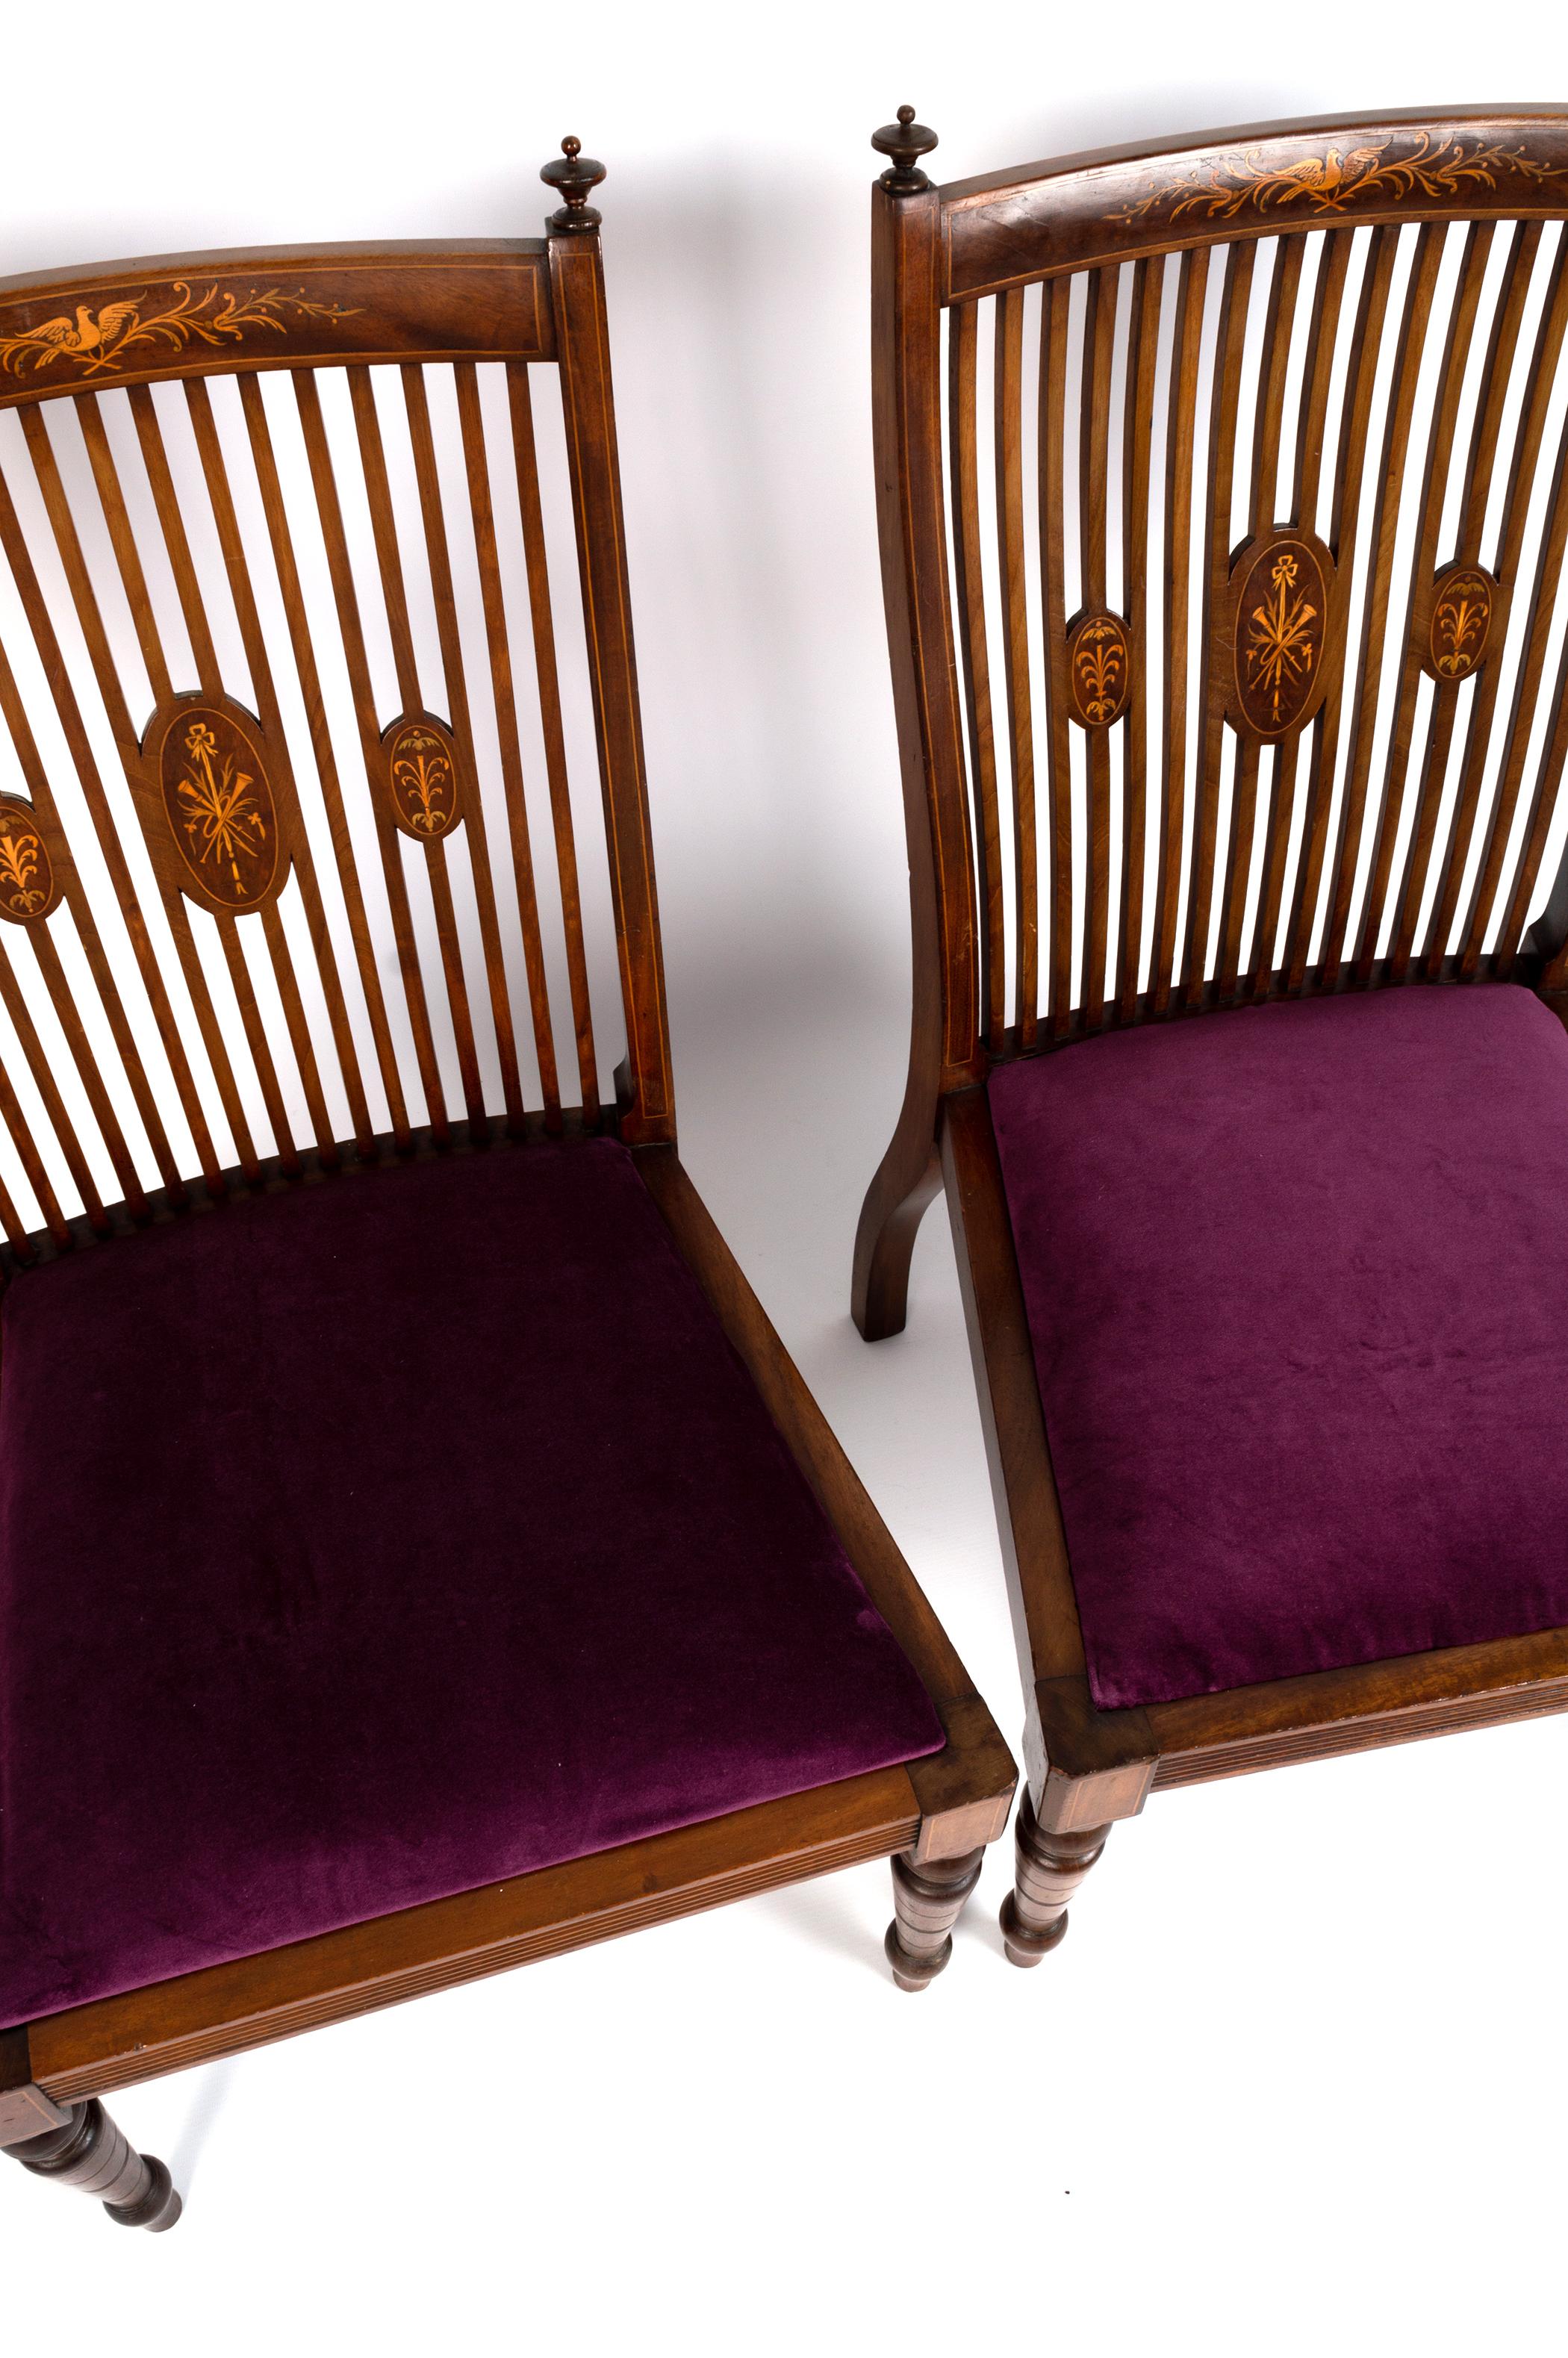 A Pair of Antique English Sheraton Revival Hall Chairs 
England C.1900.
Satinwood Inlaid Mahogany with upholstered seats.
 